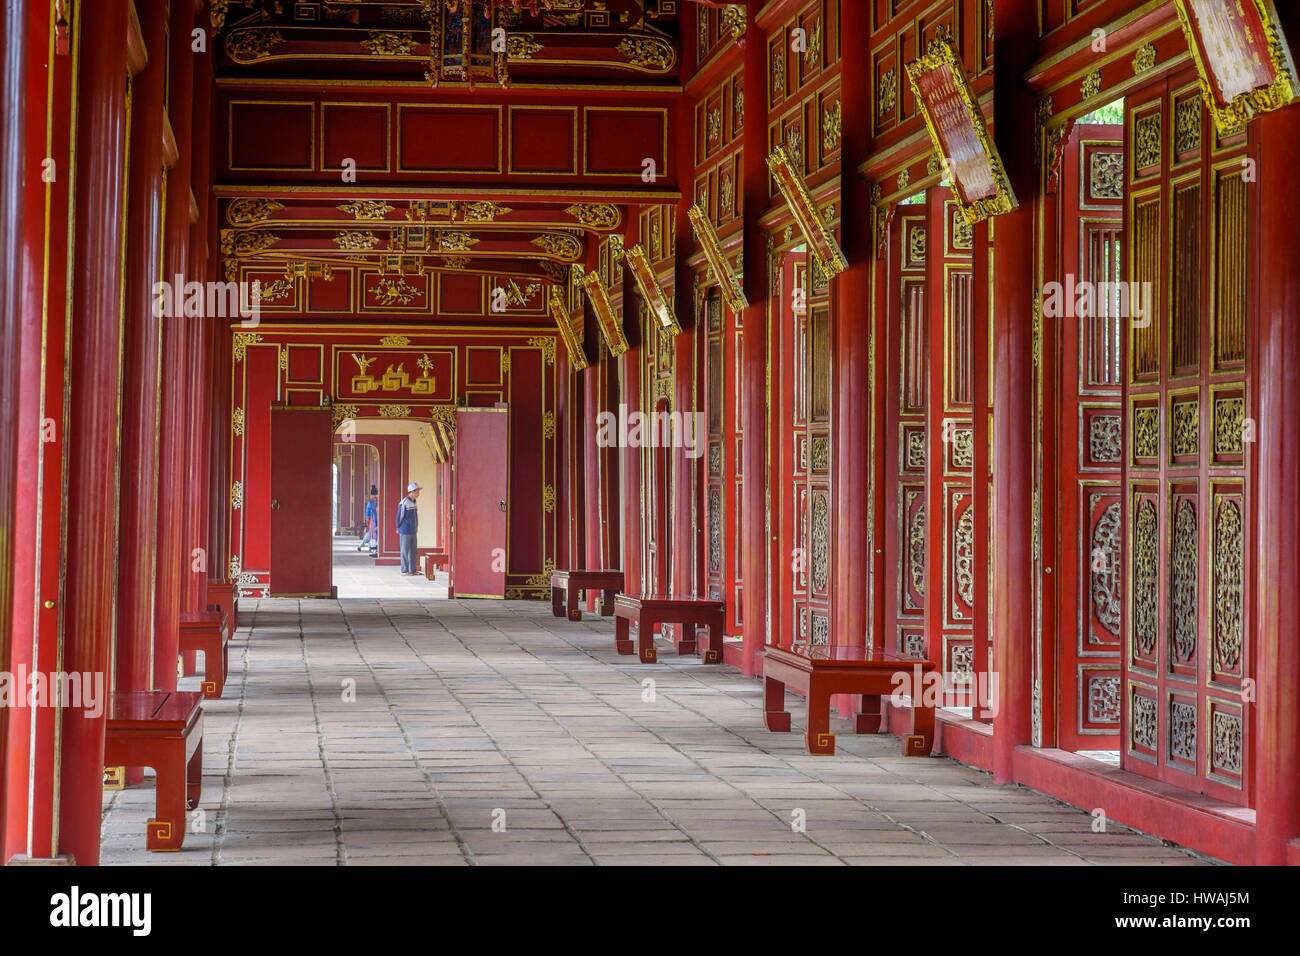 Vietnam, North Central Coast region, Thua Thien-Hue province, Hue, the Imperial City, listed as World Heritage site by UNESCO, eastern corridor Stock Photo